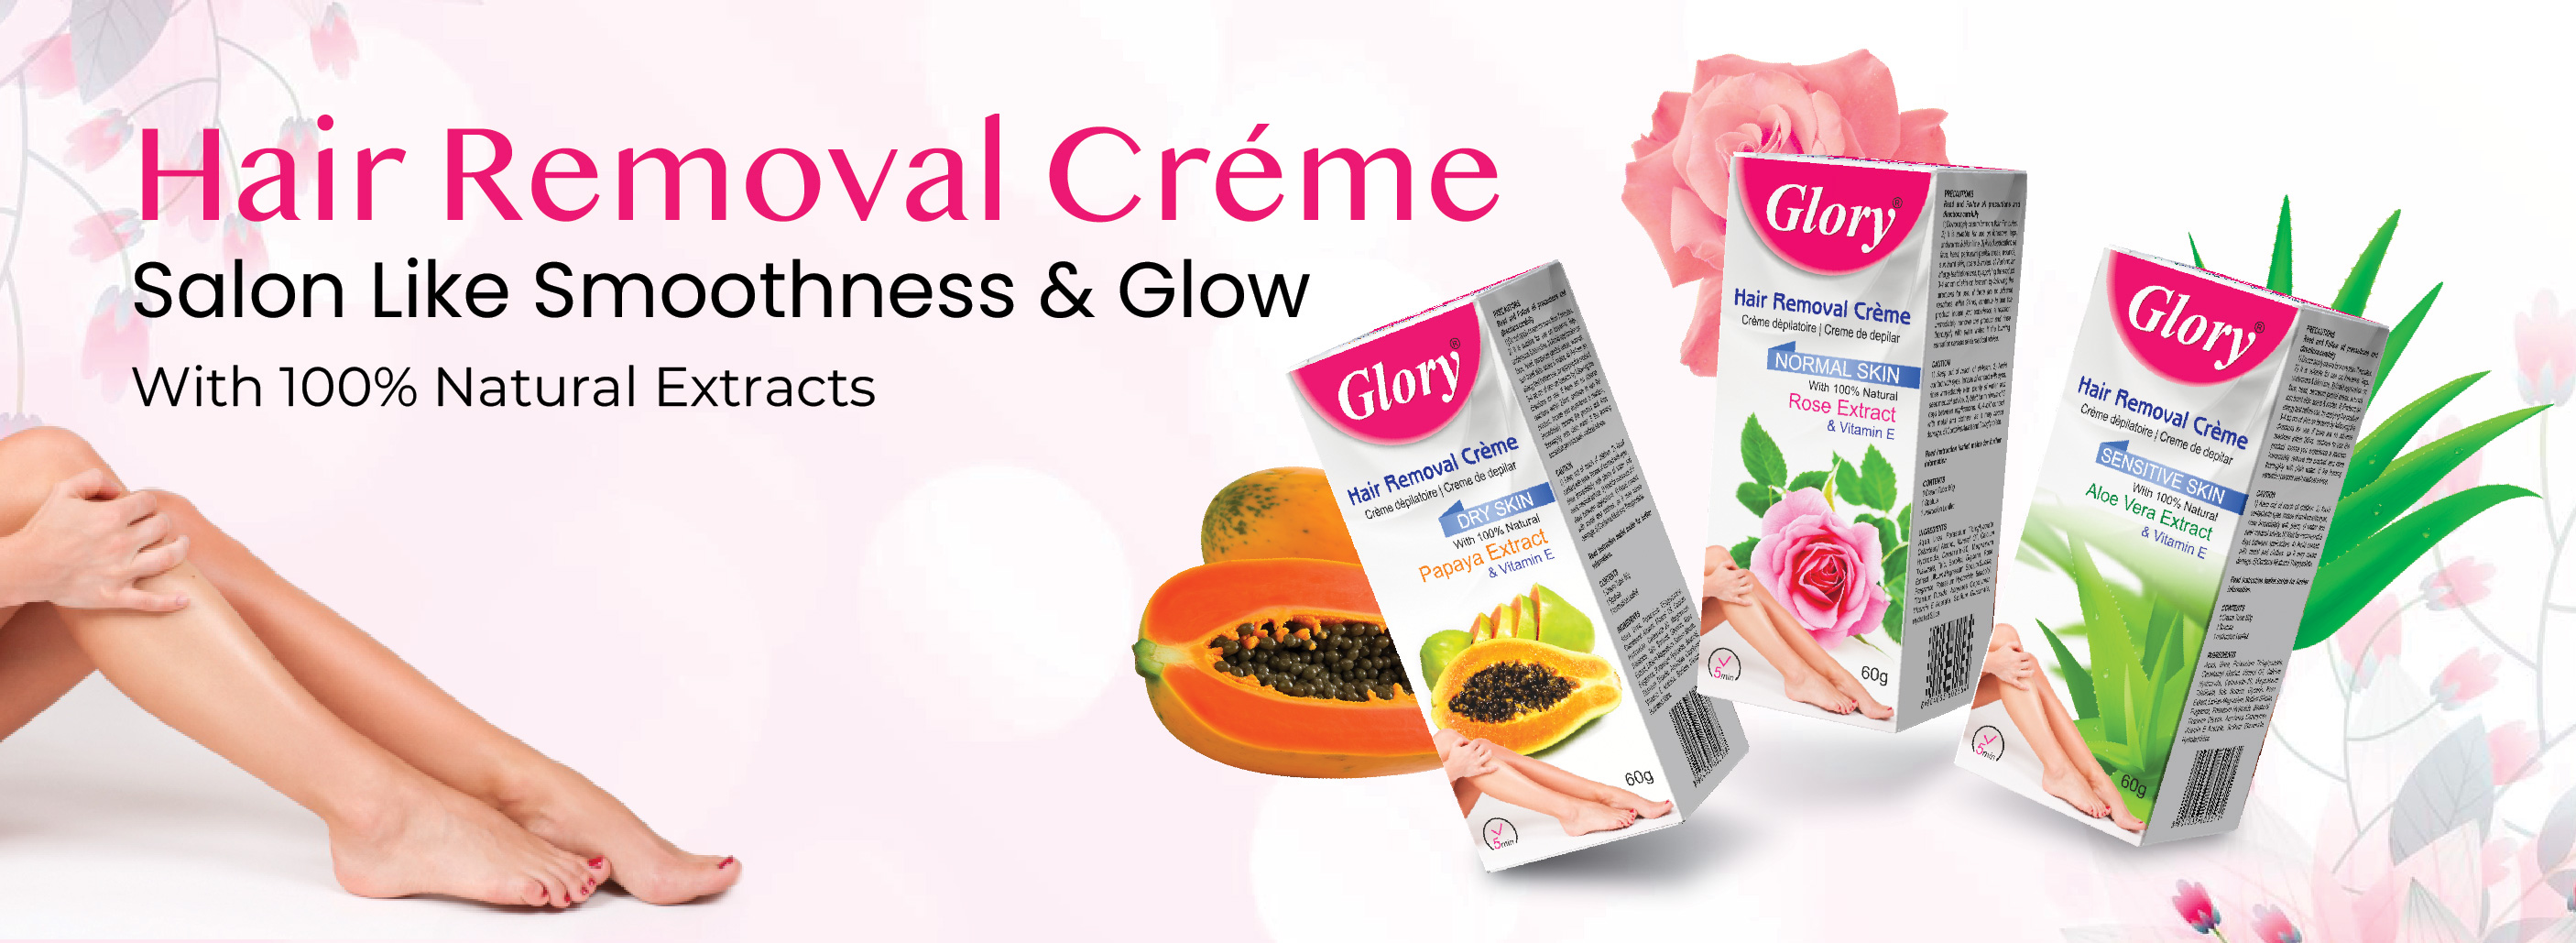 Hair Removal Creme Manufacturer | Hair Removal Creme Manufacturer in West Indies